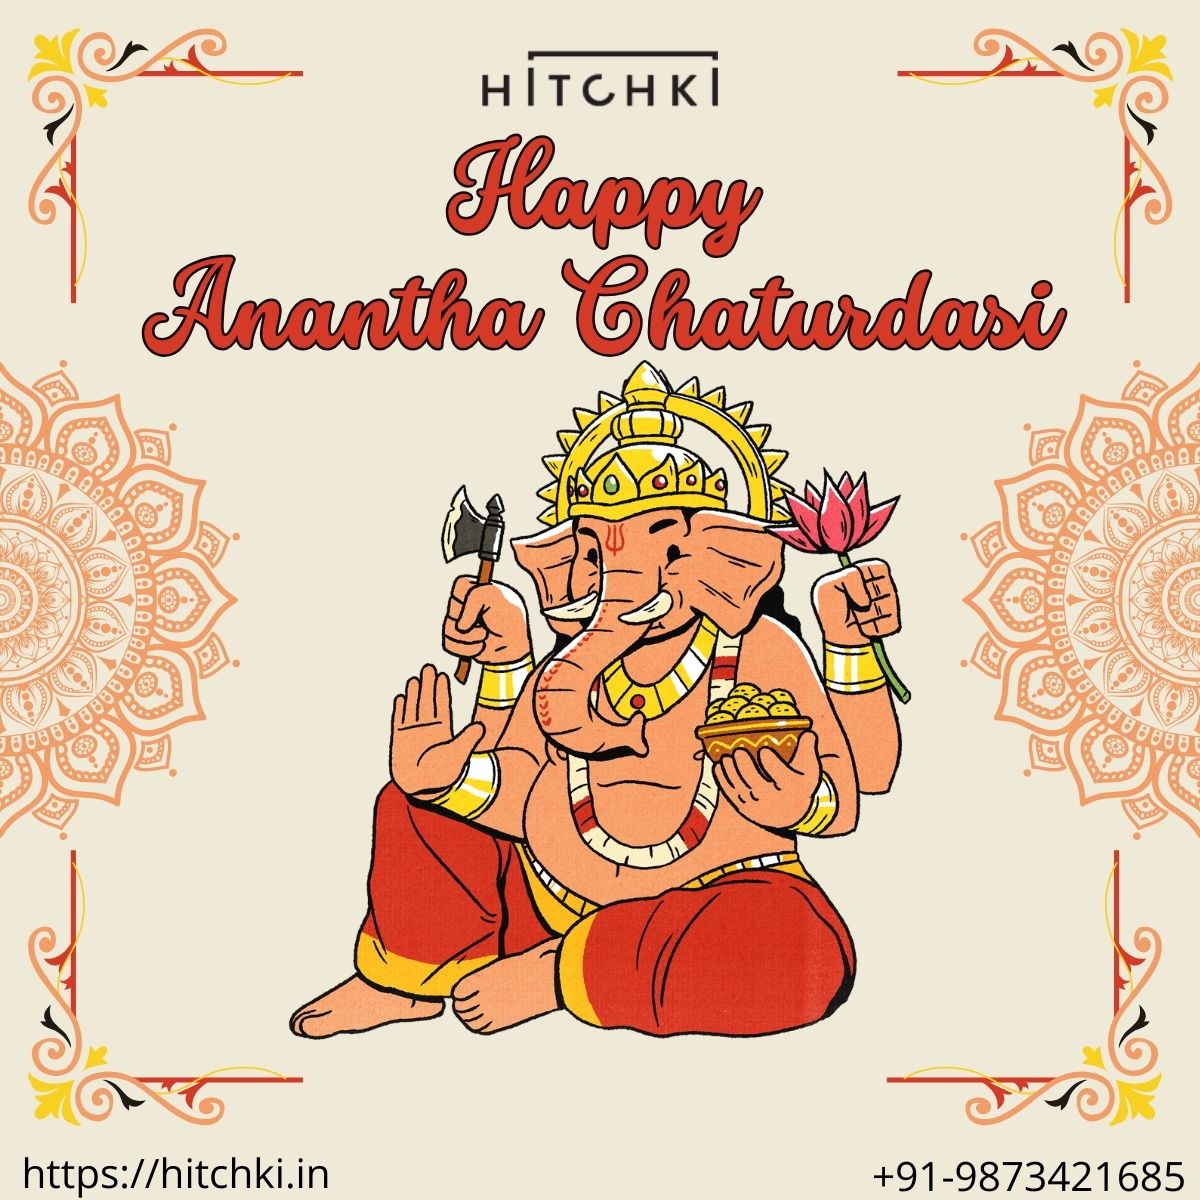 Wishing You A Blessed Anantha Chaturdasi From Hitchki